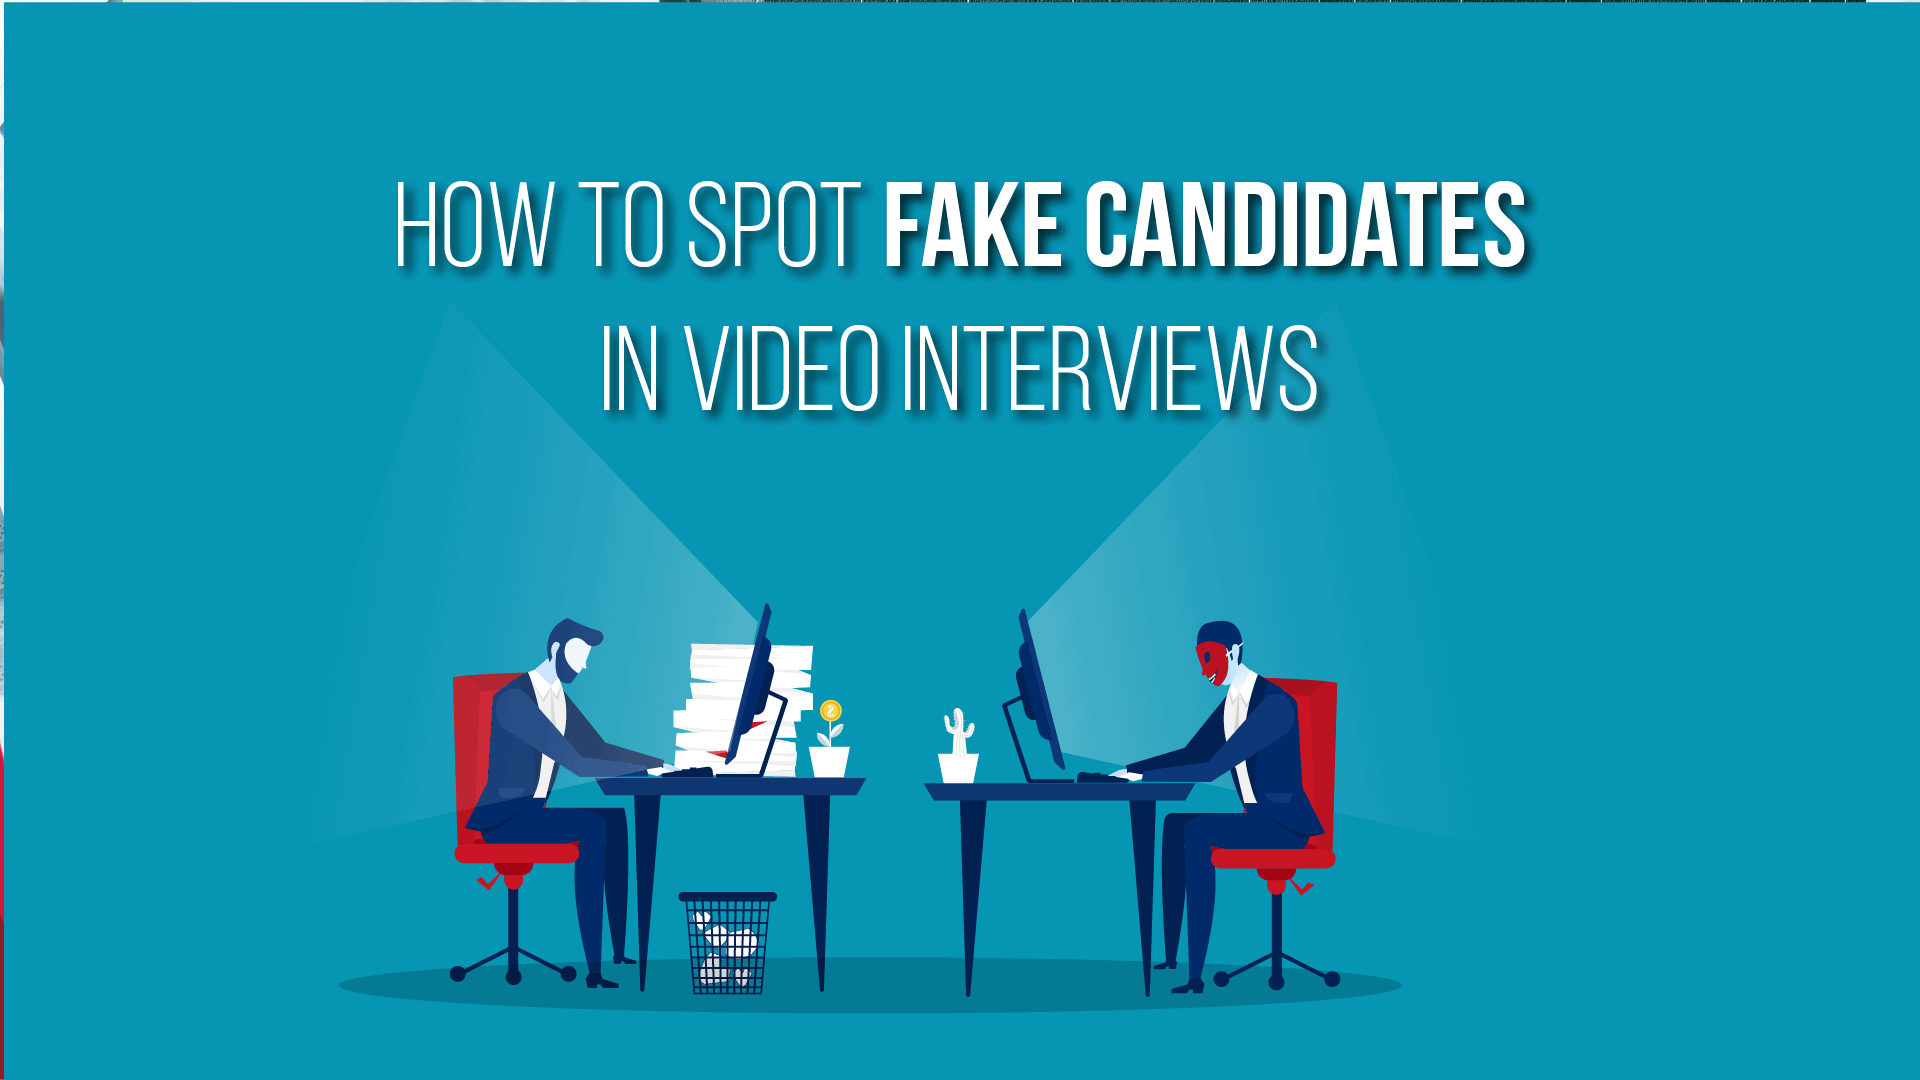 Proxy Interviews and Fake Skype Calls Rising as Fast as Videoconferencing